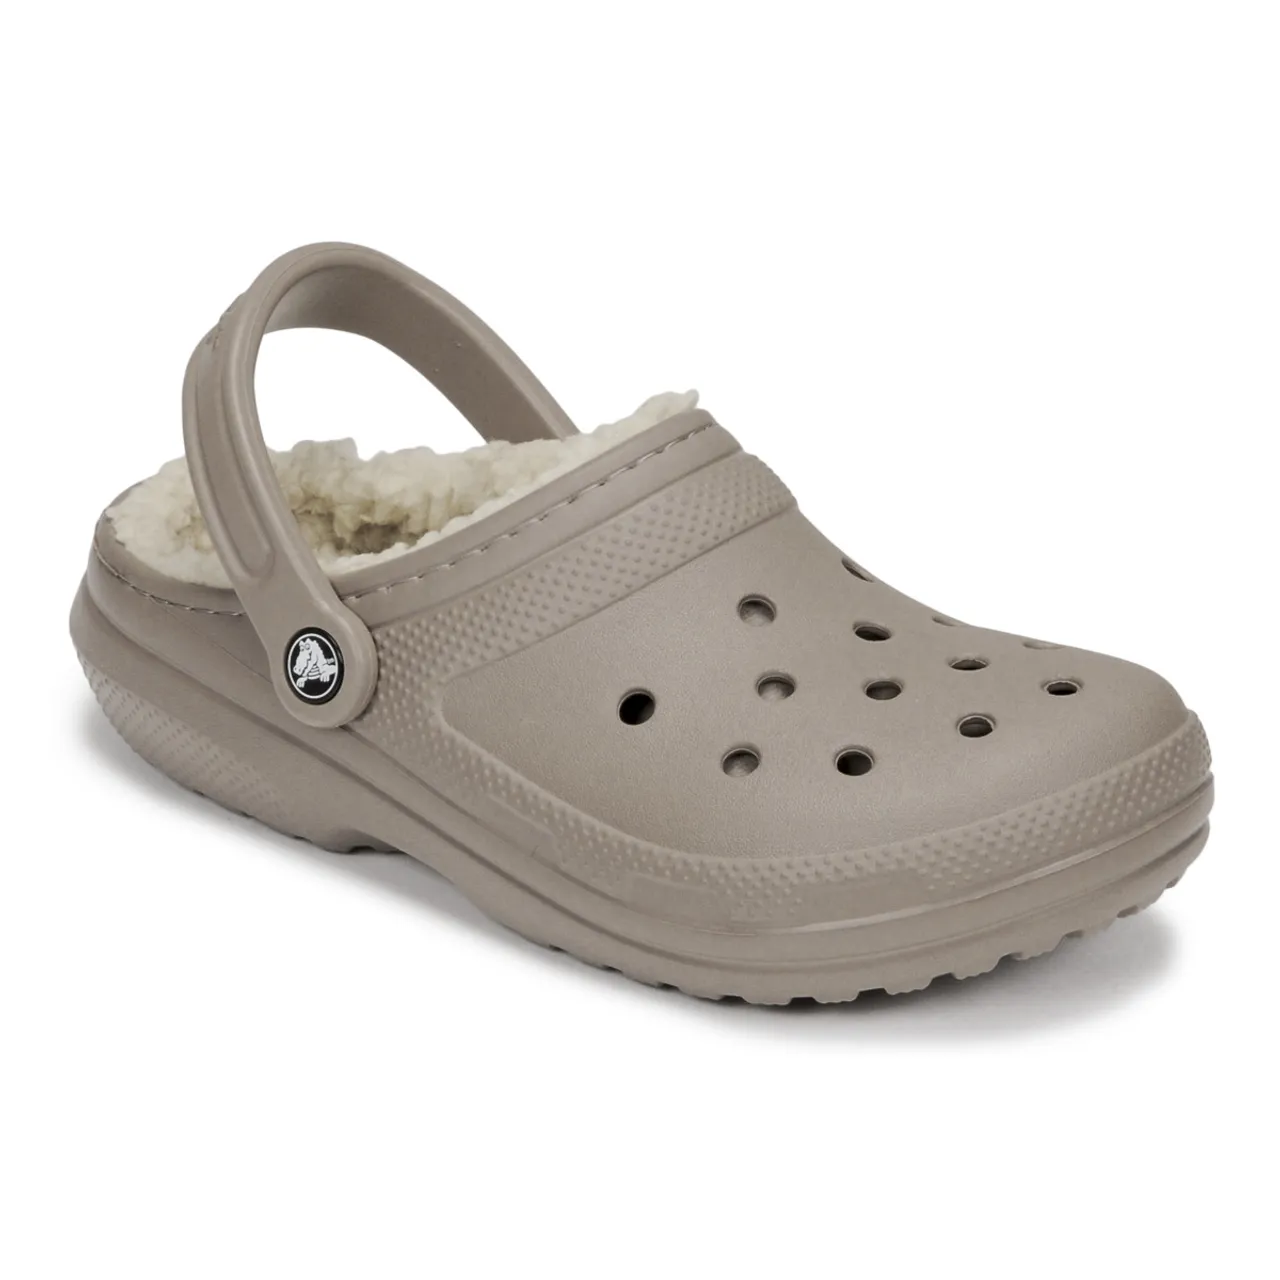 Crocs  CLASSIC LINED CLOG  women's Clogs (Shoes) in Beige